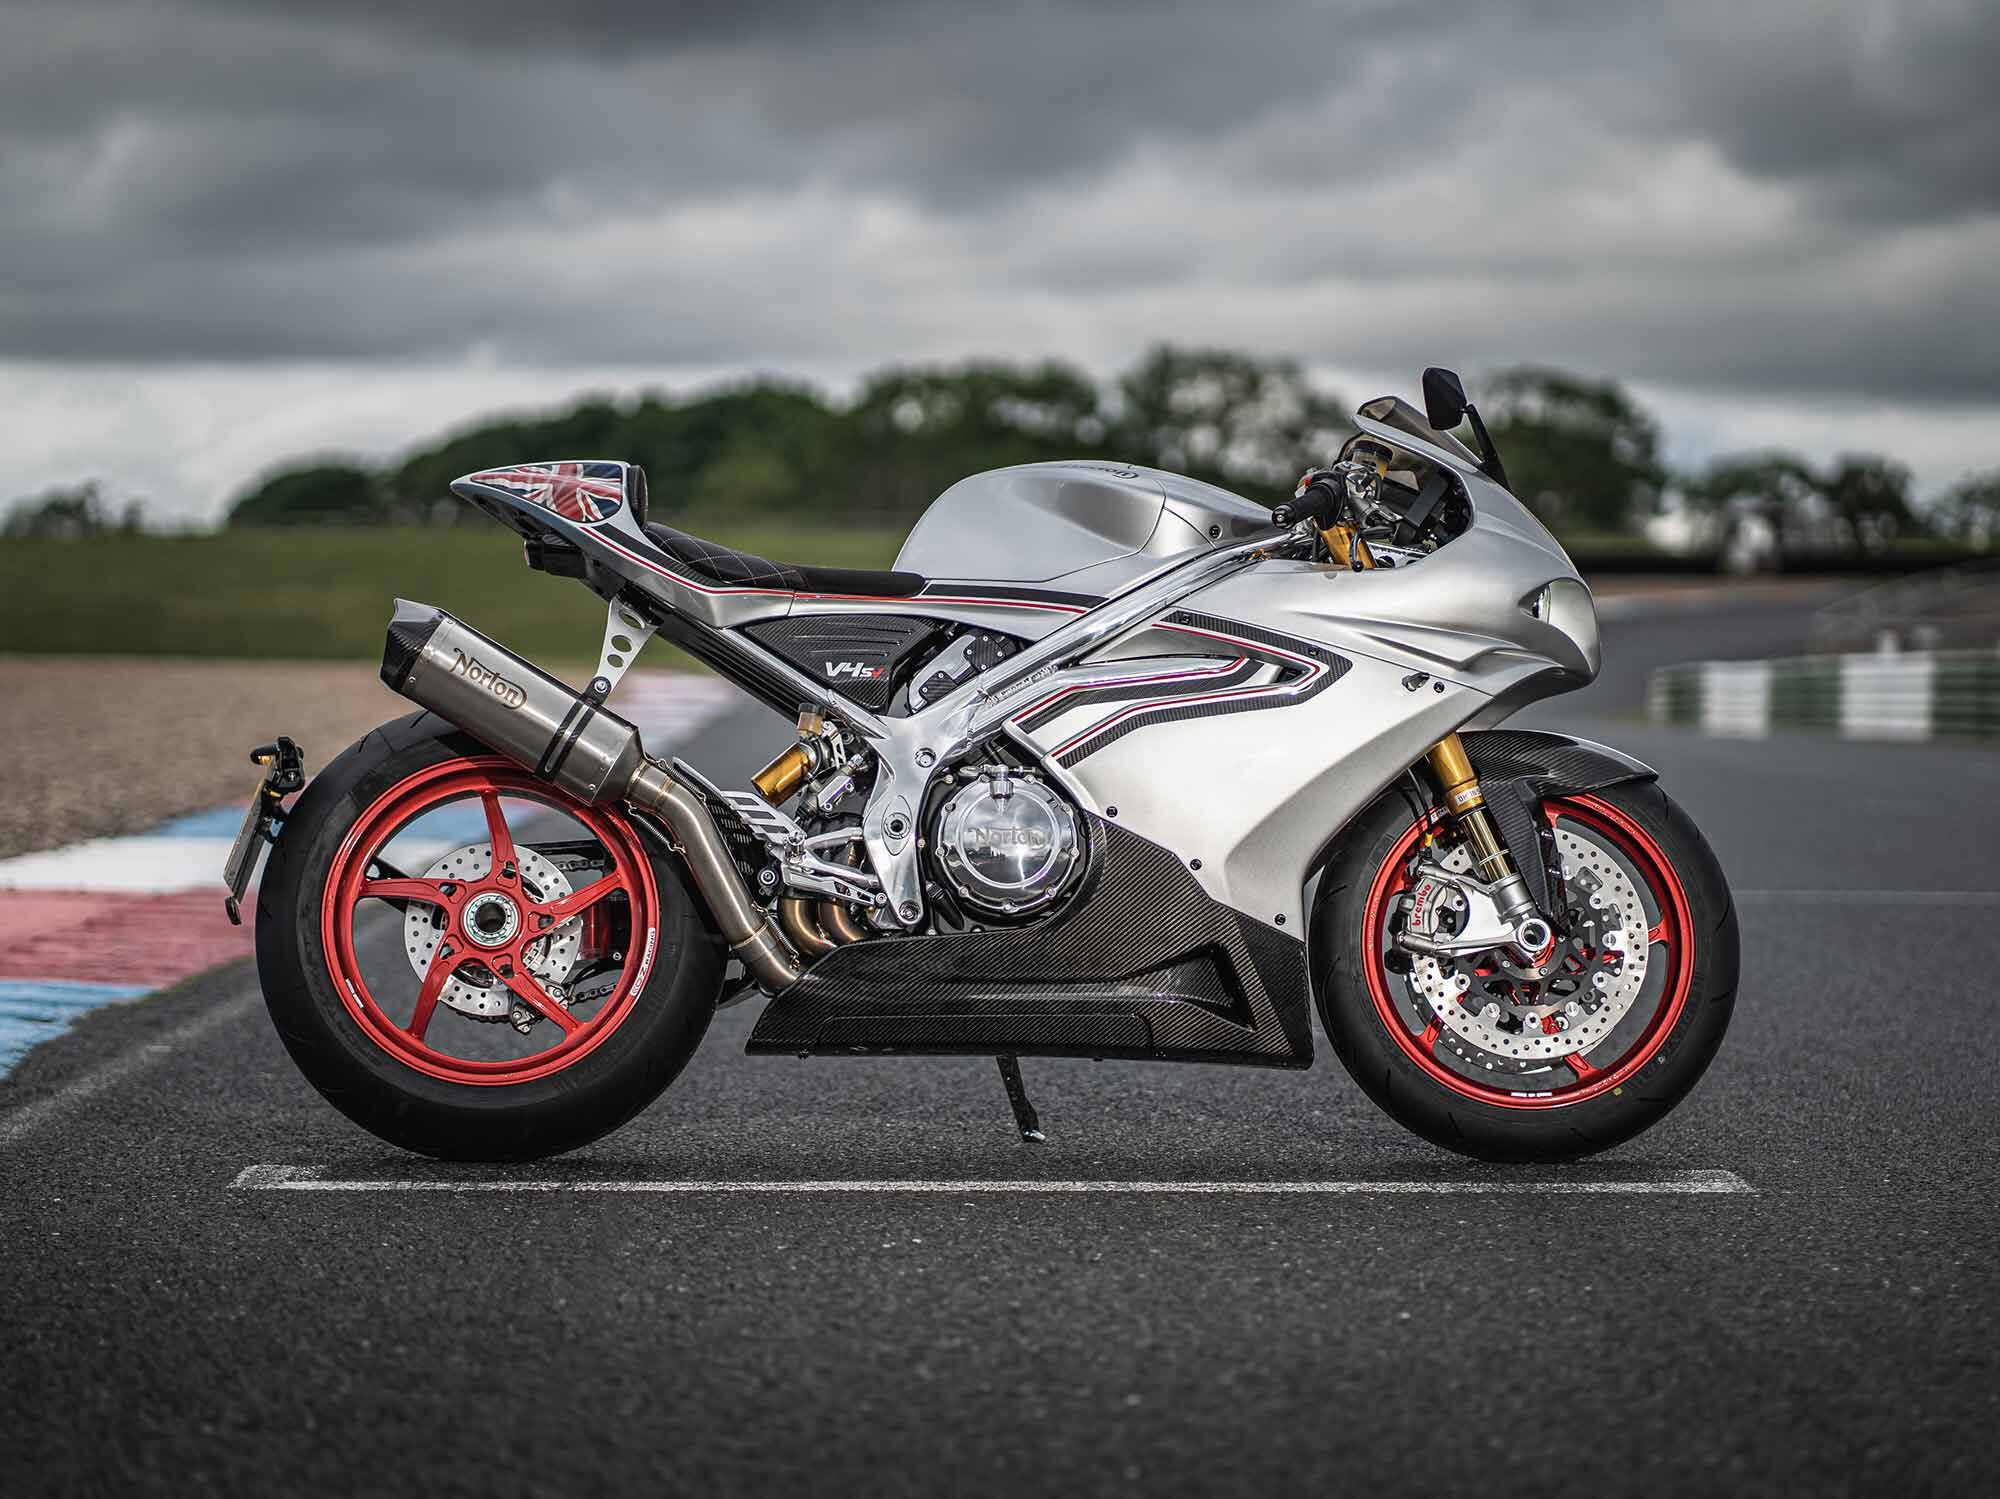 Forget the lap times and power figures, this is what Norton’s superbike was meant to be, even if it is a few years late.